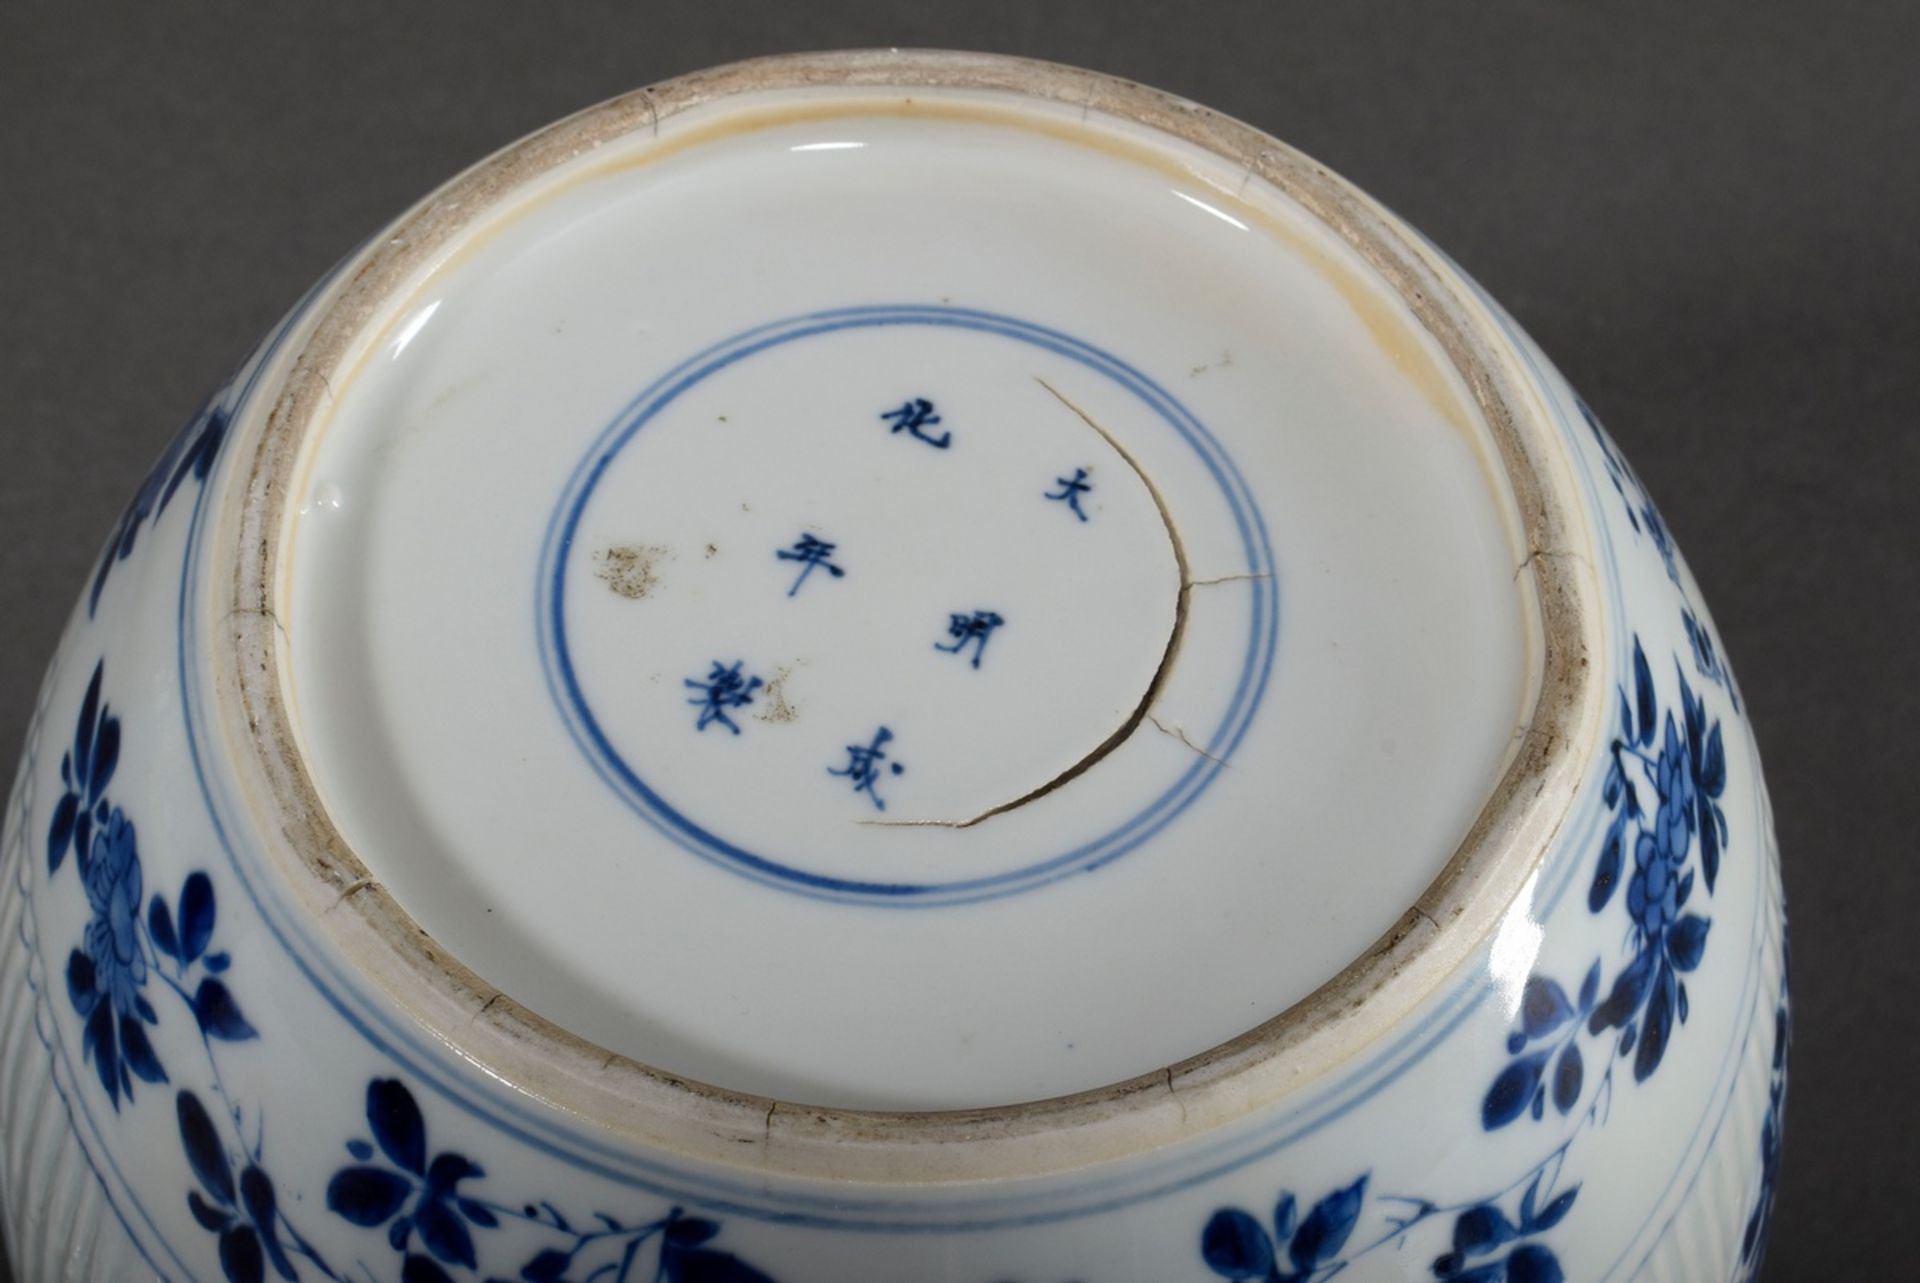 Chinese porcelain ginger pot with grooved body and floral blue painting reserves on the wall, botto - Image 5 of 5